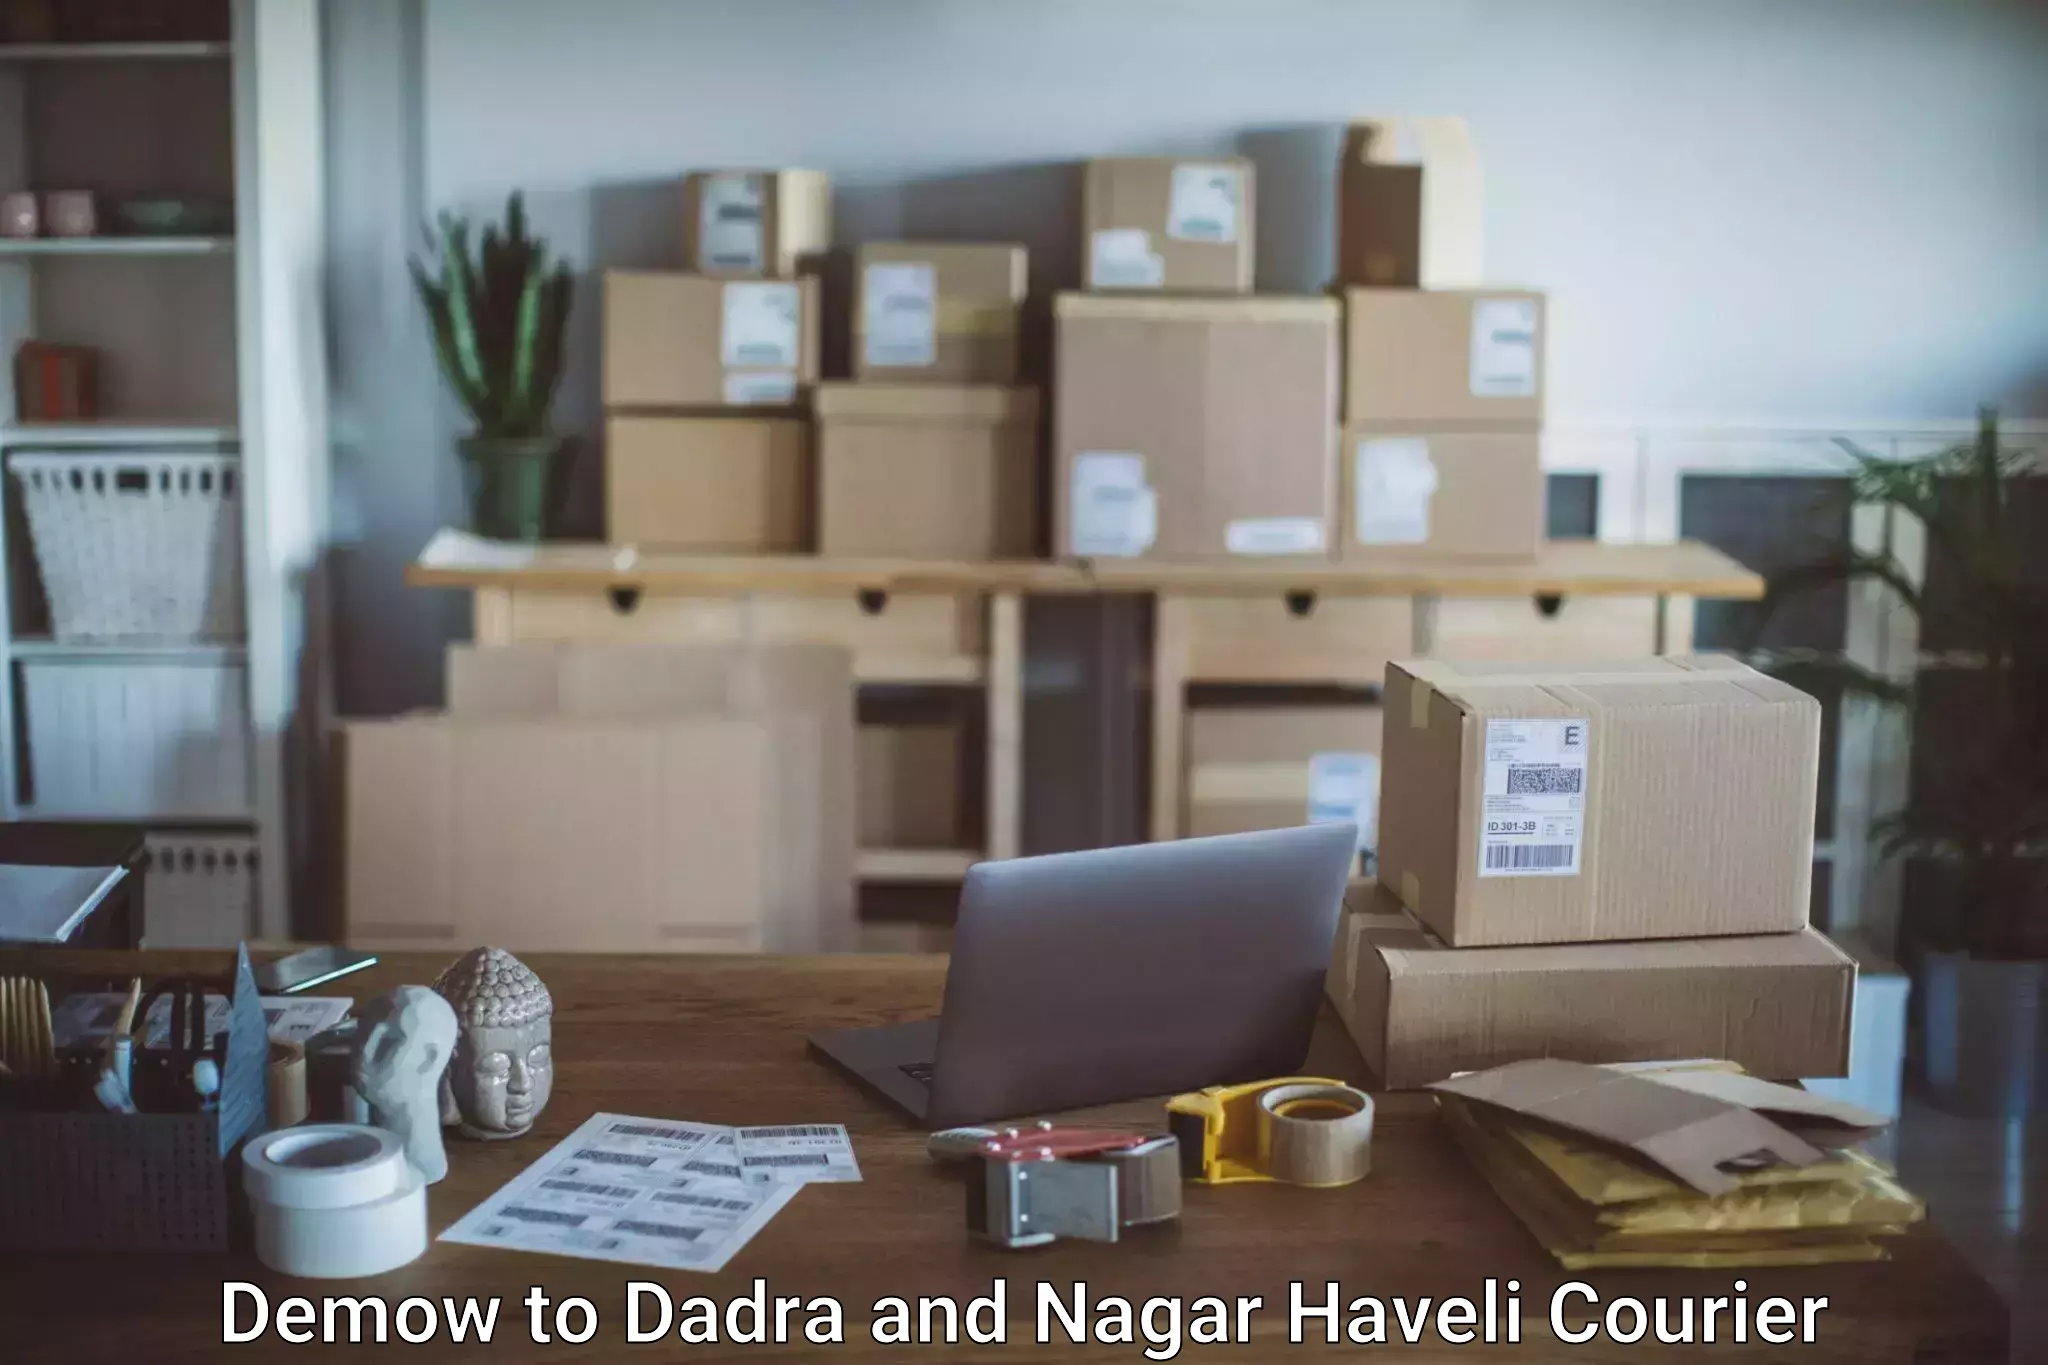 Baggage transport cost Demow to Dadra and Nagar Haveli